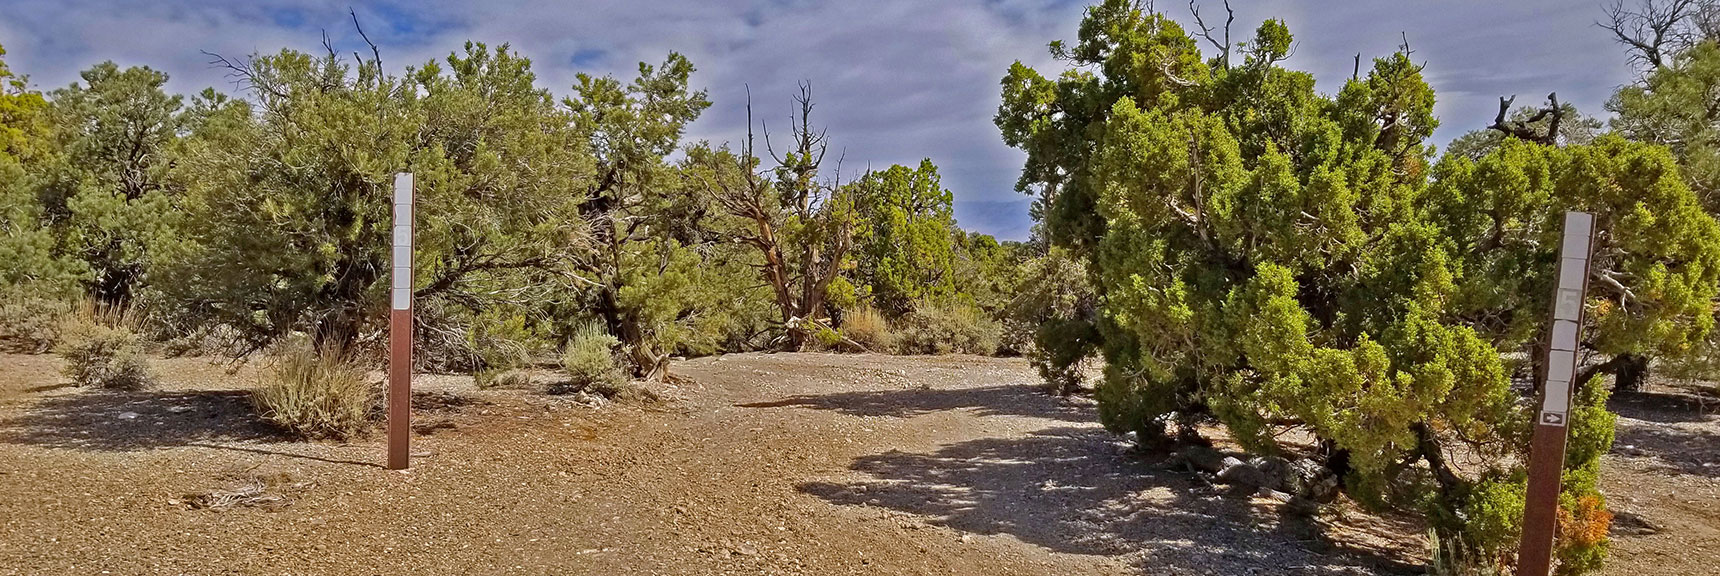 More Road Splits. Signs Difficult to Read, But Wouldn't Help Show Where Pinyon Pine Trail Goes. | Pinyon Pine Loop Trail | Sawmill Trailhead | Lee Canyon | Mt Charleston Wilderness | Spring Mountains, Nevada